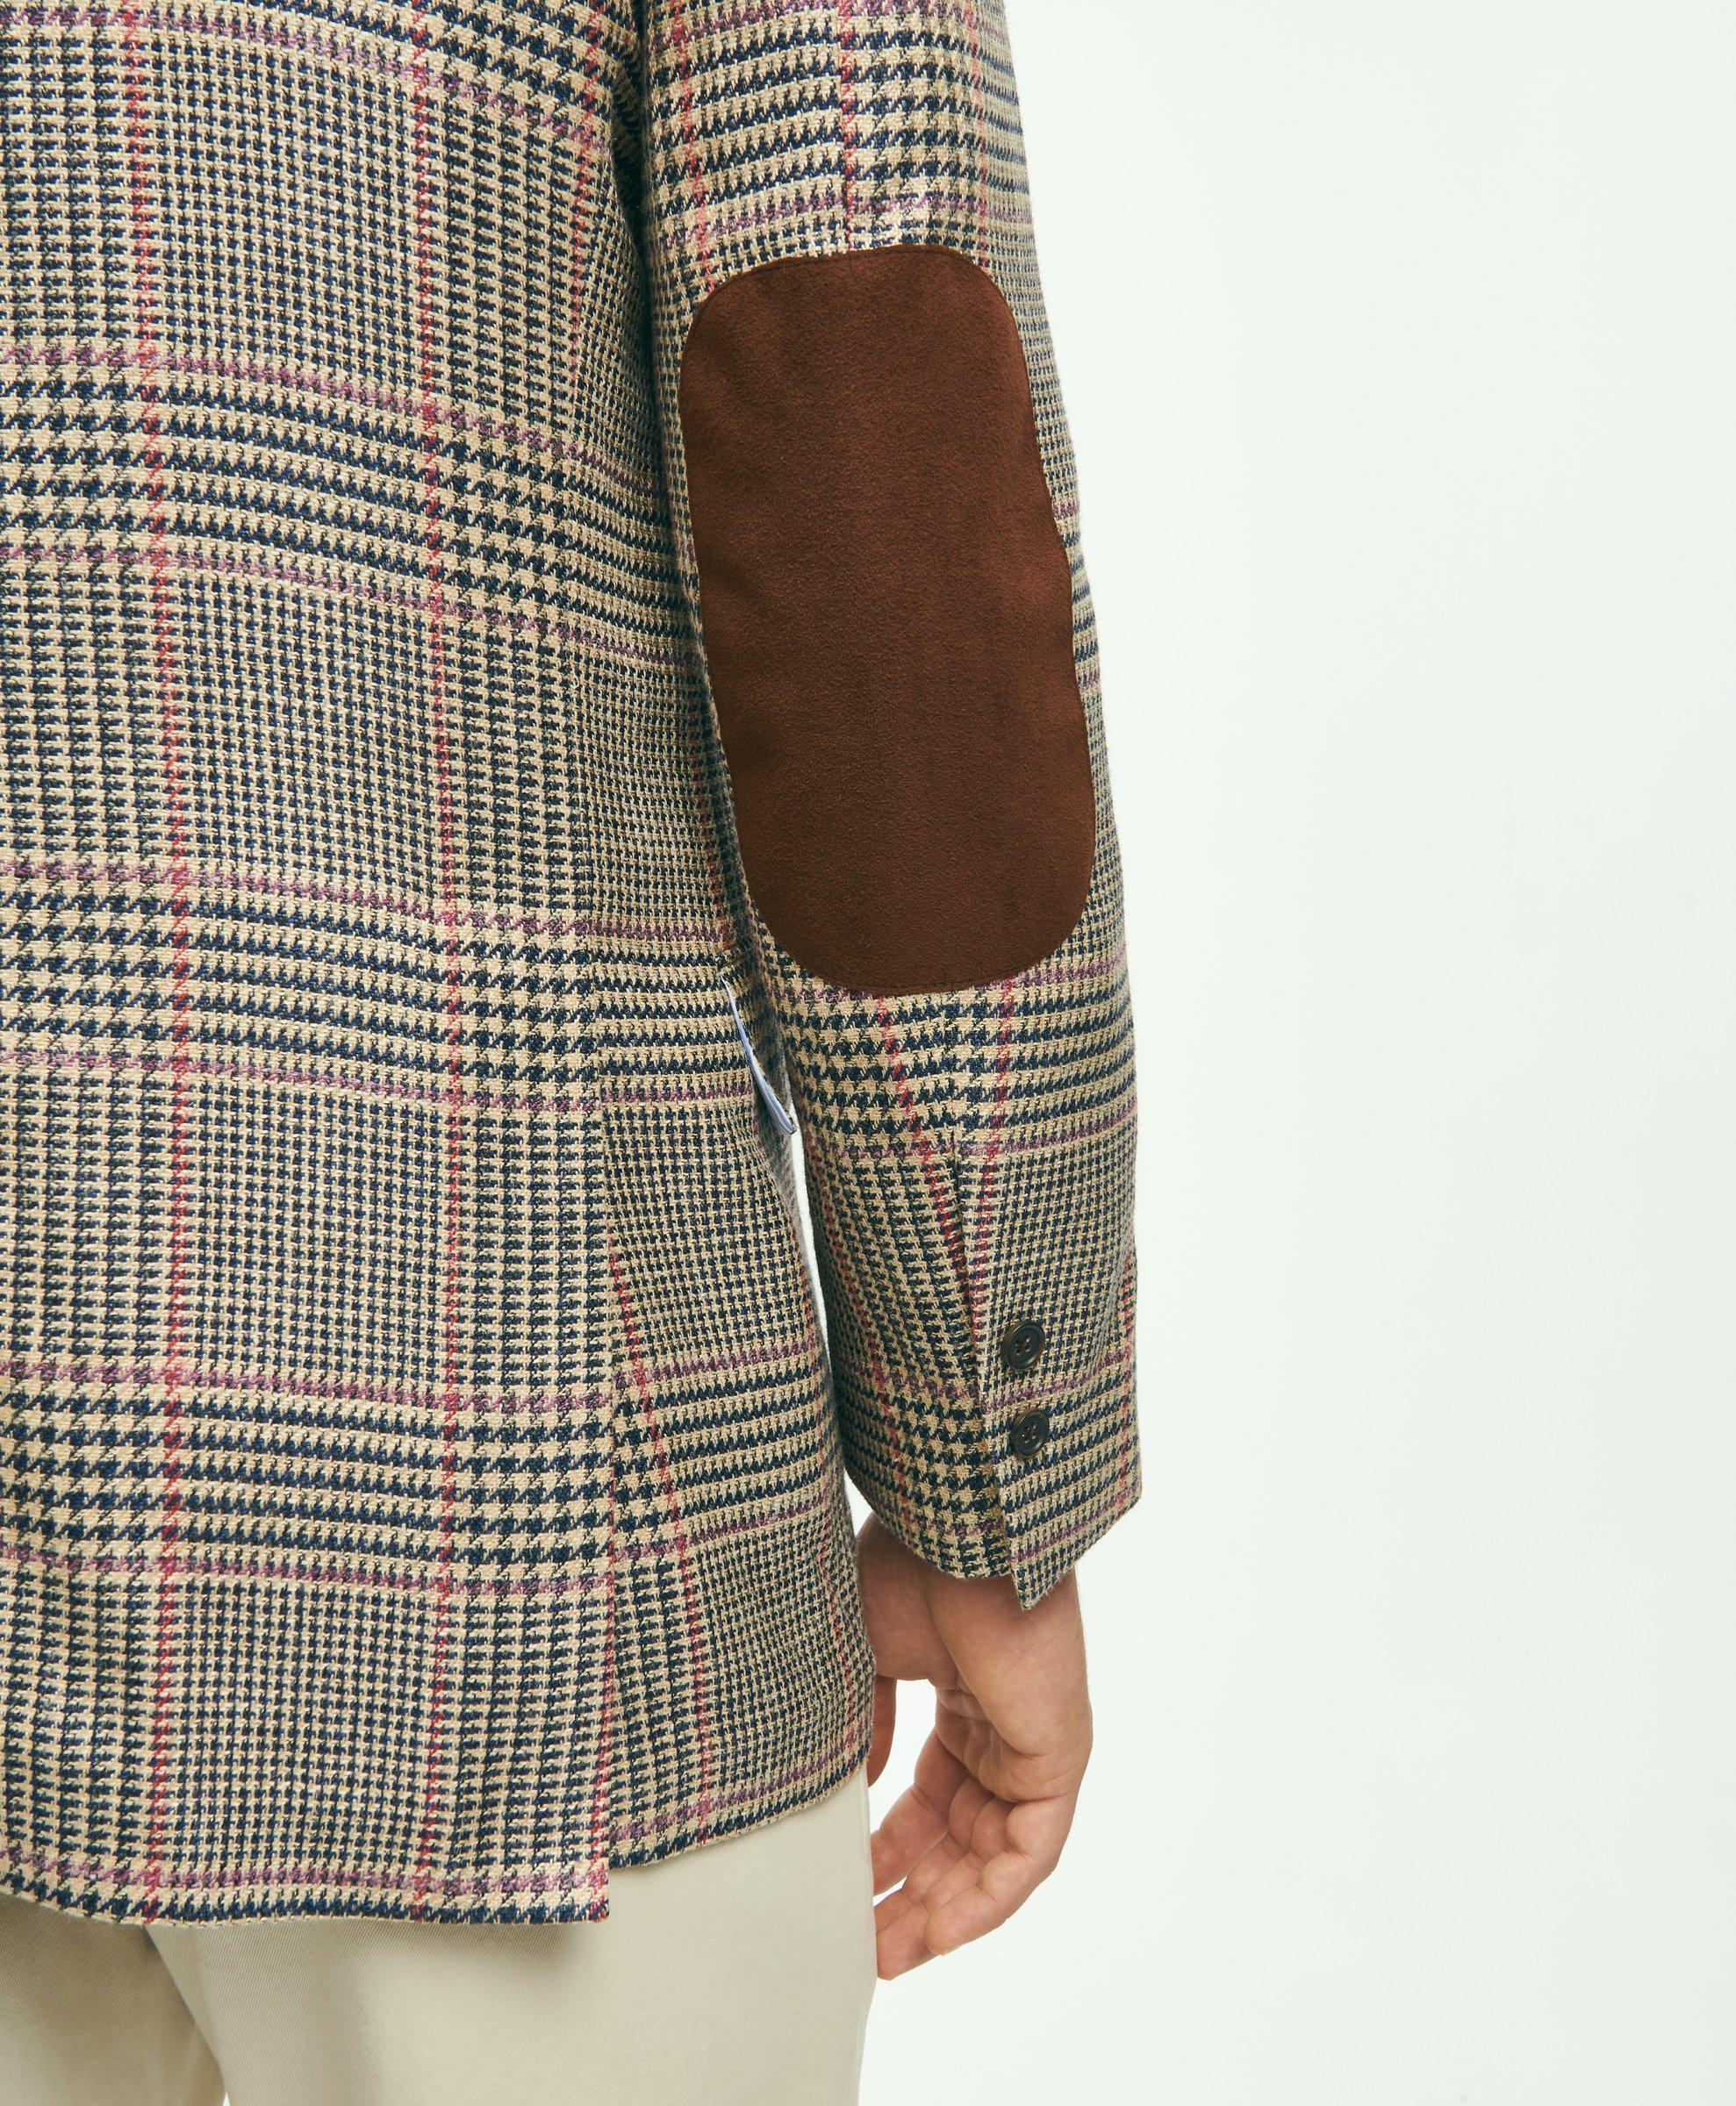 Tweed jacket with patches  Elbow patch jacket, Leather elbow